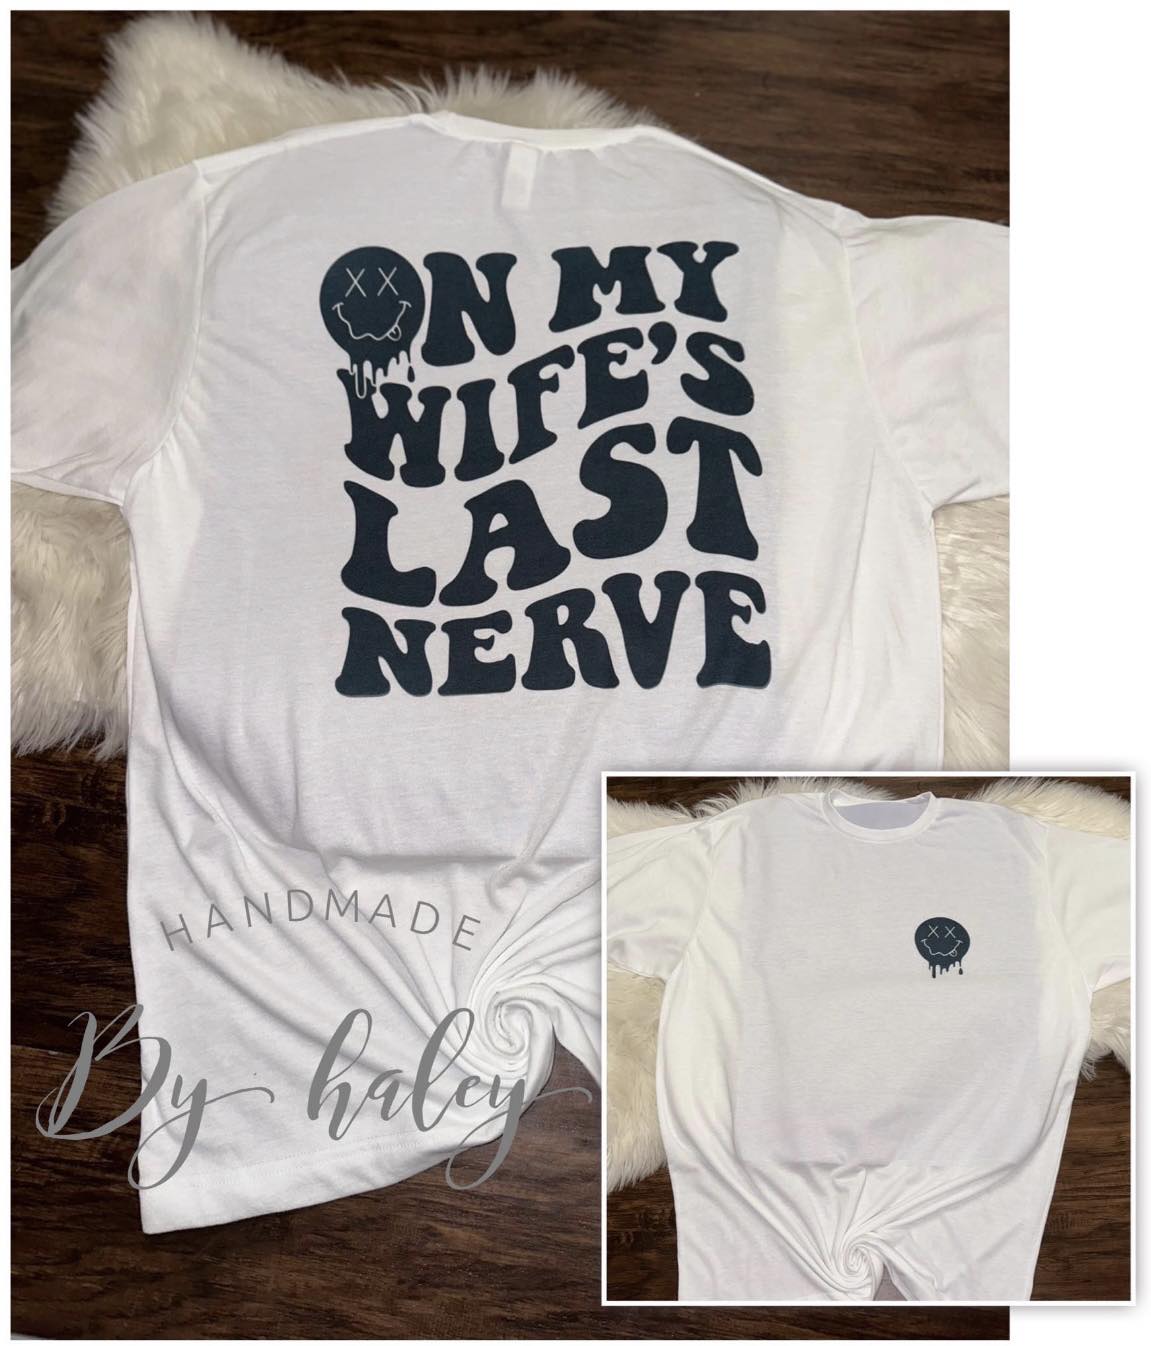 On My Wife's Last Nerve T-Shirt